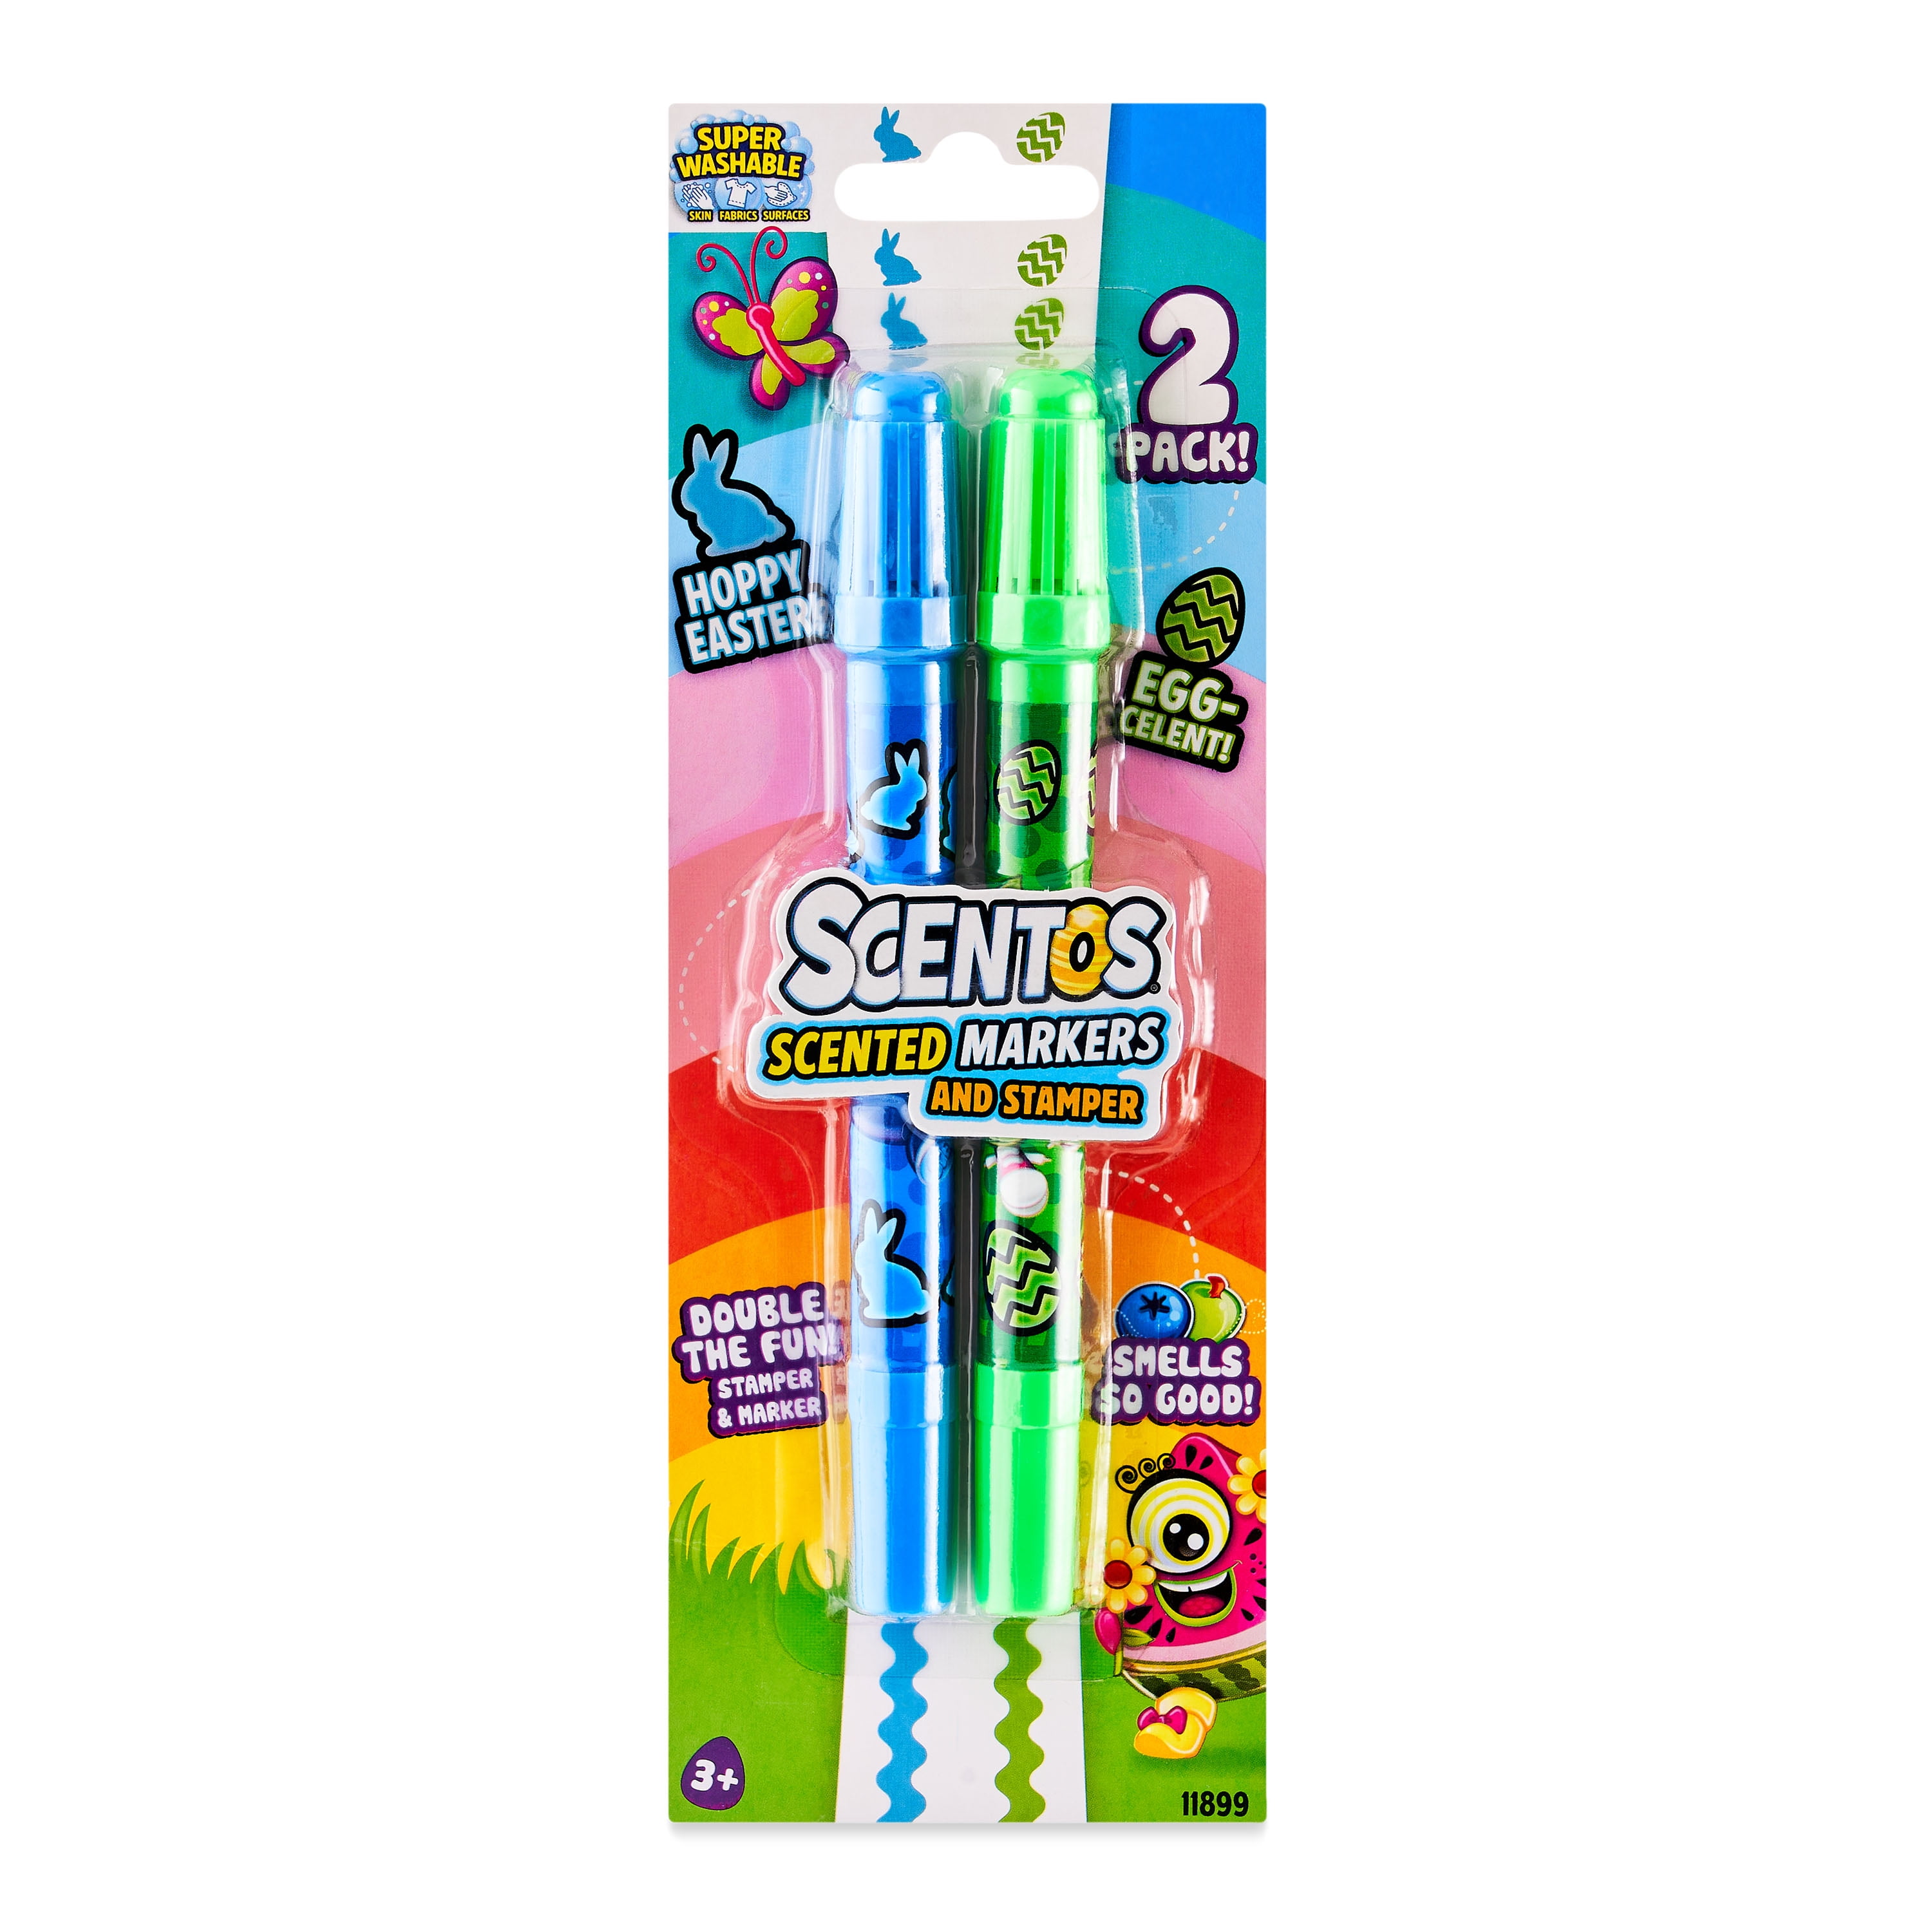 Scentos Smarkers - 16 Markers – Two Kids and A Dog